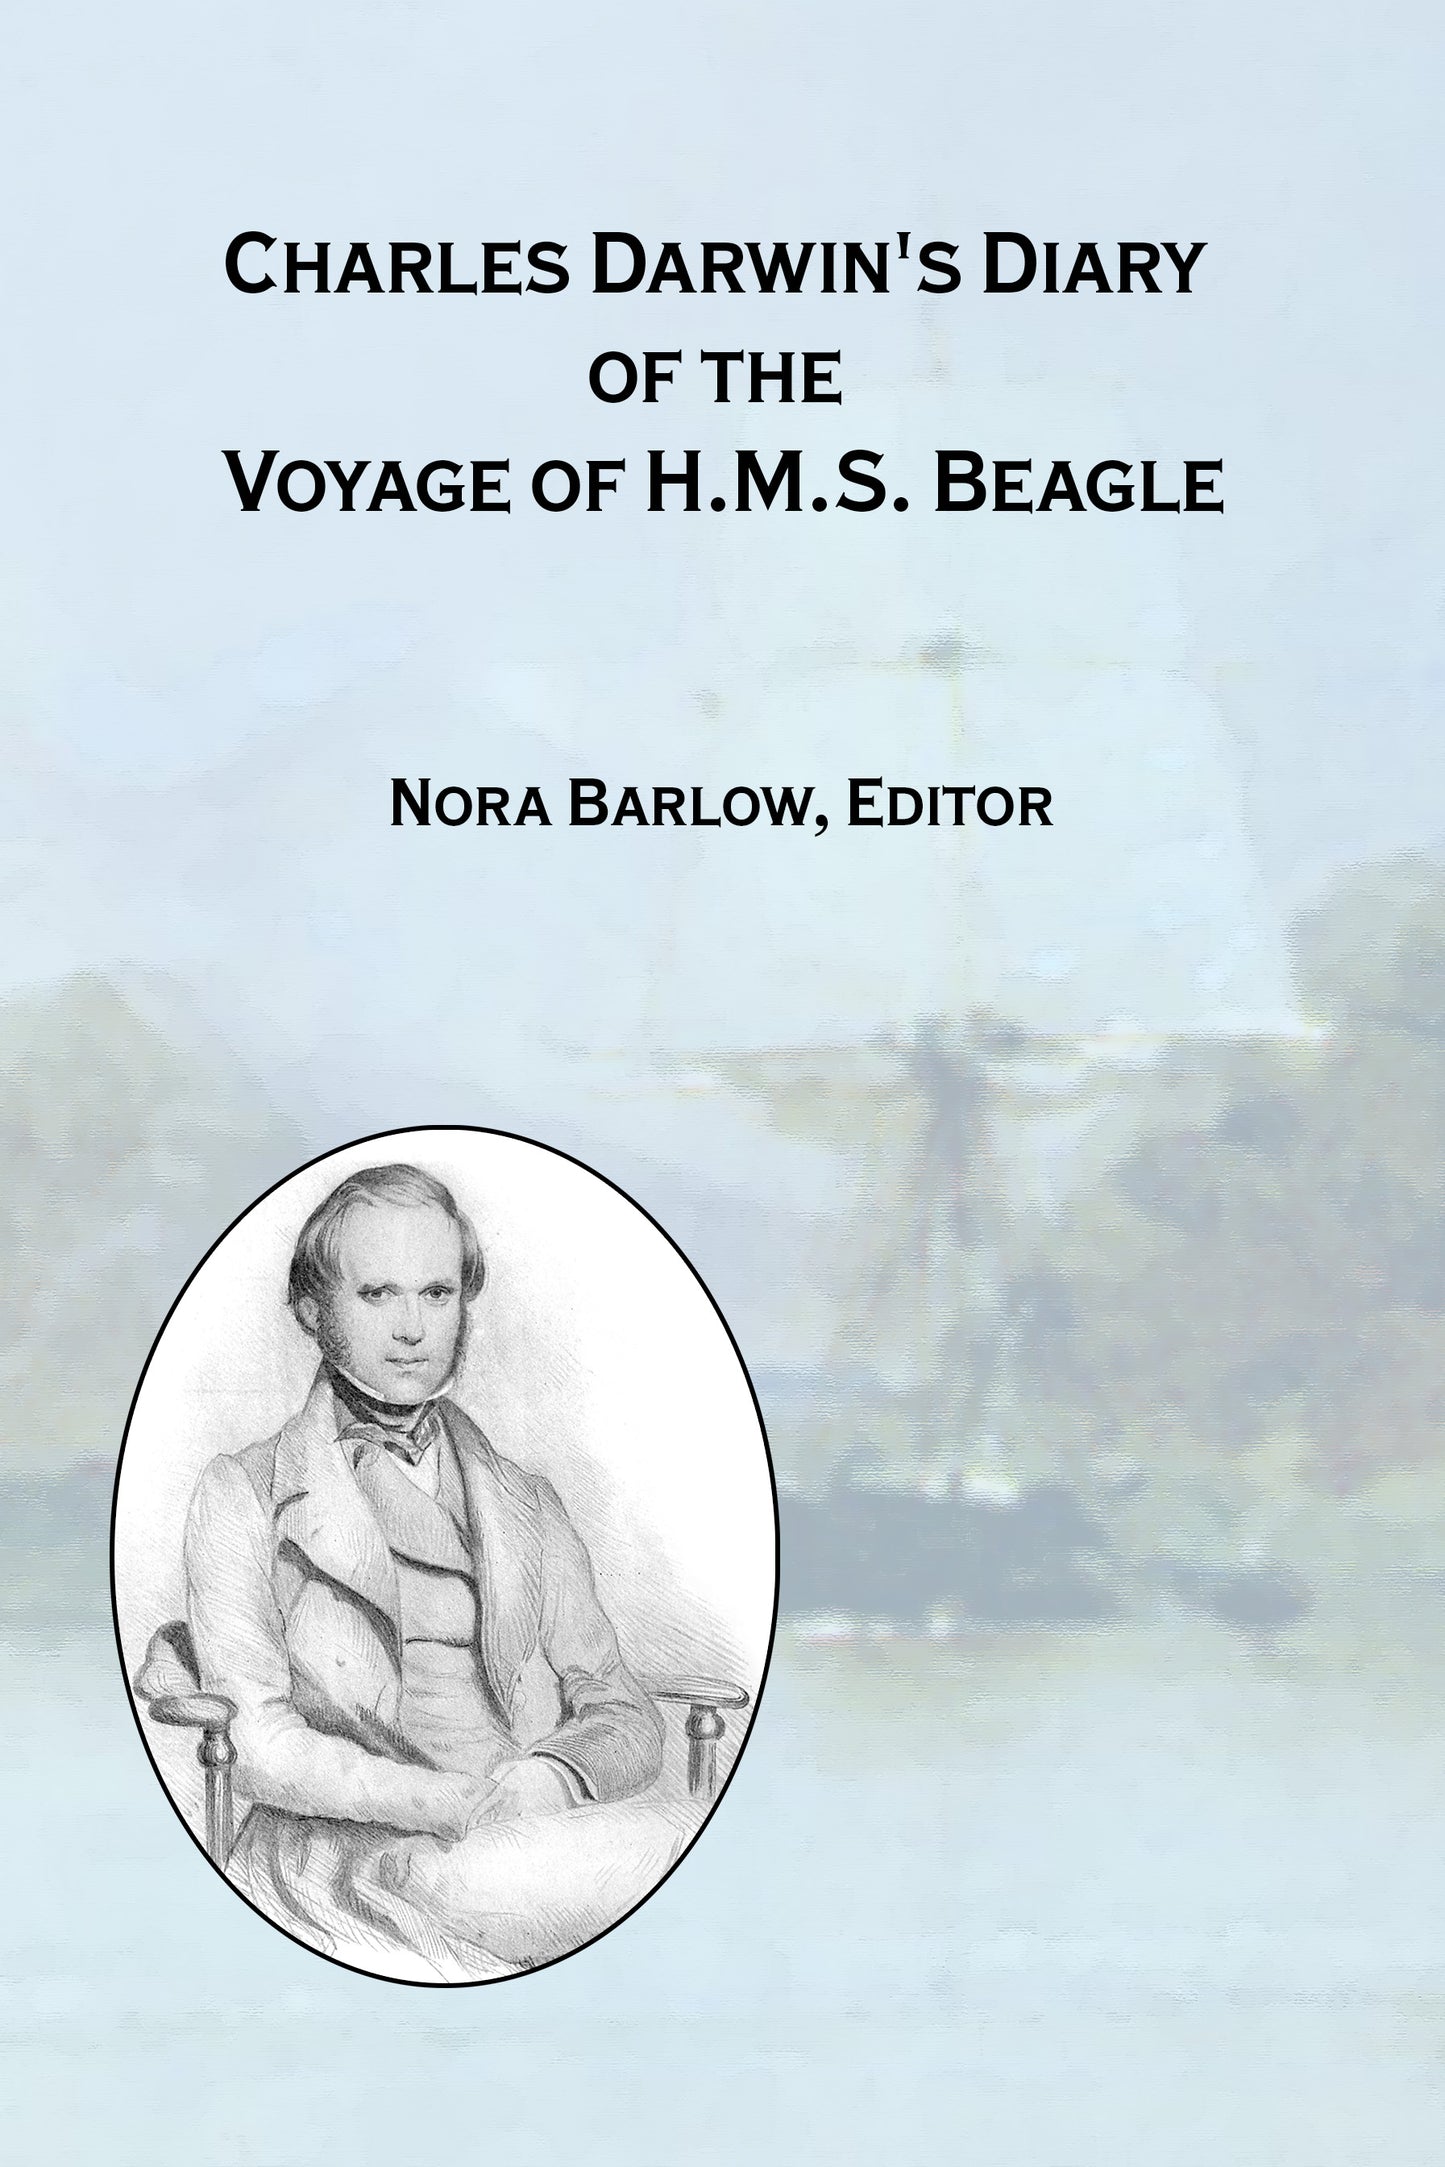 Charles Darwin's Diary of the Voyage of H.M.S. Beagle